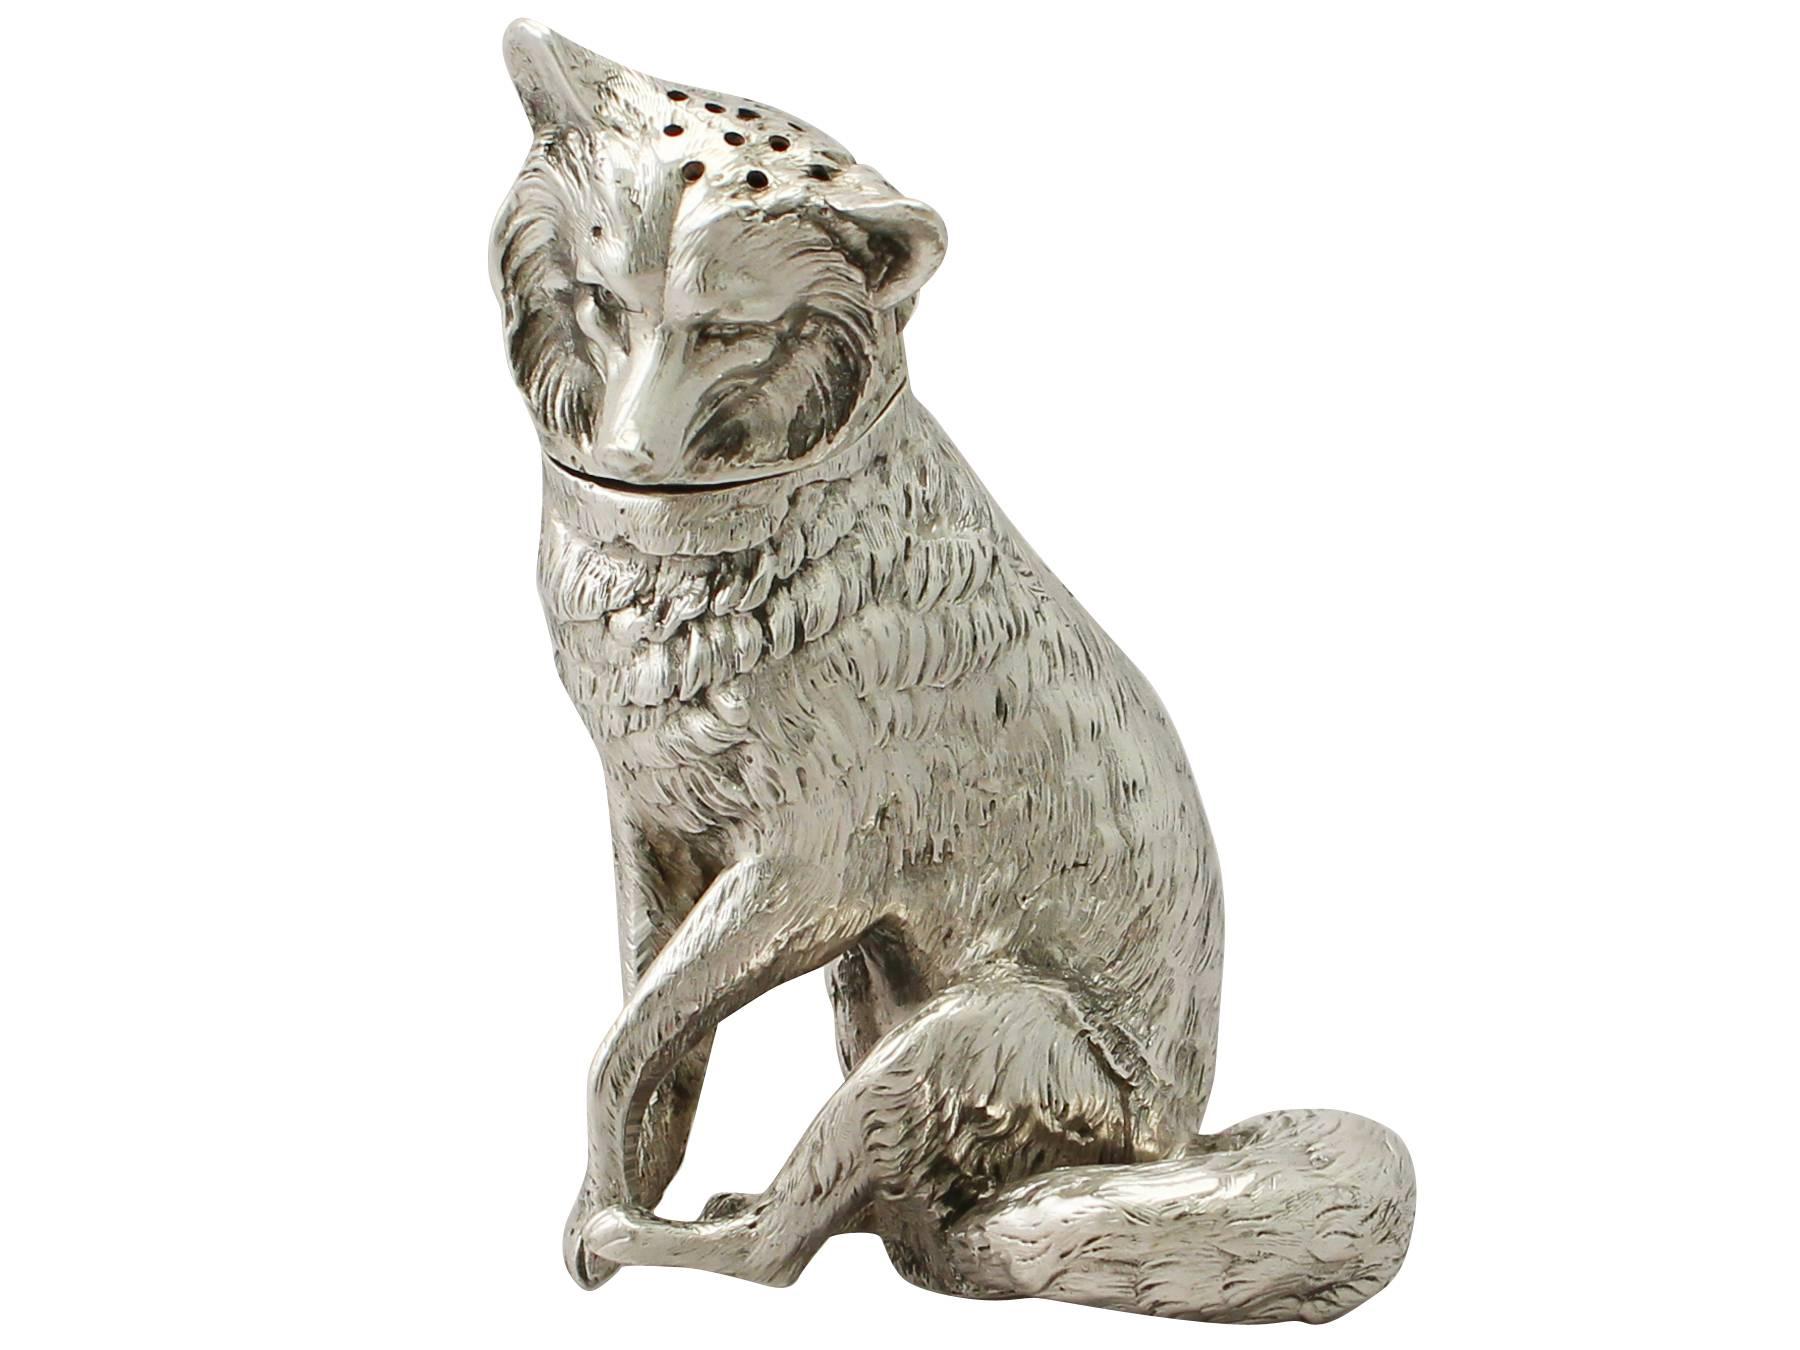 An exceptional, fine and impressive, large antique Edwardian English cast sterling silver pepper shaker in the form of a fox; an addition to our animal related silverware collection.

This exceptional antique Edwardian cast sterling silver